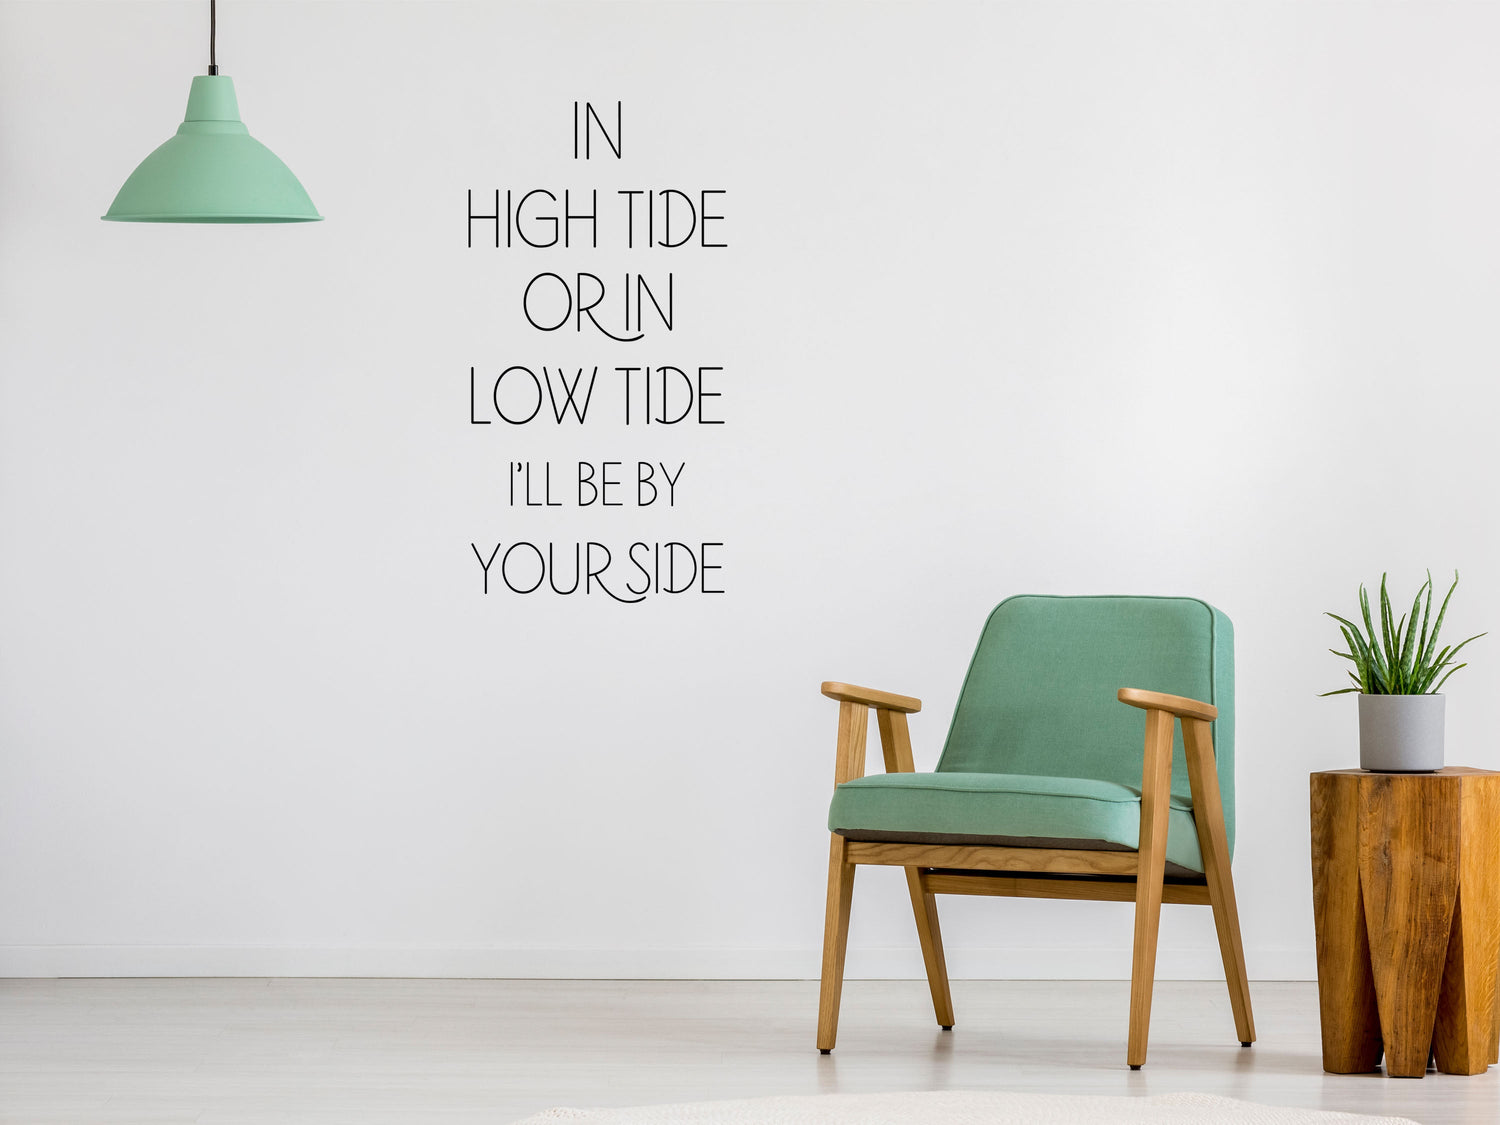 In High Tide or Low Tide - Inspirational Wall Decals Vinyl Wall Decal Inspirational Wall Signs 